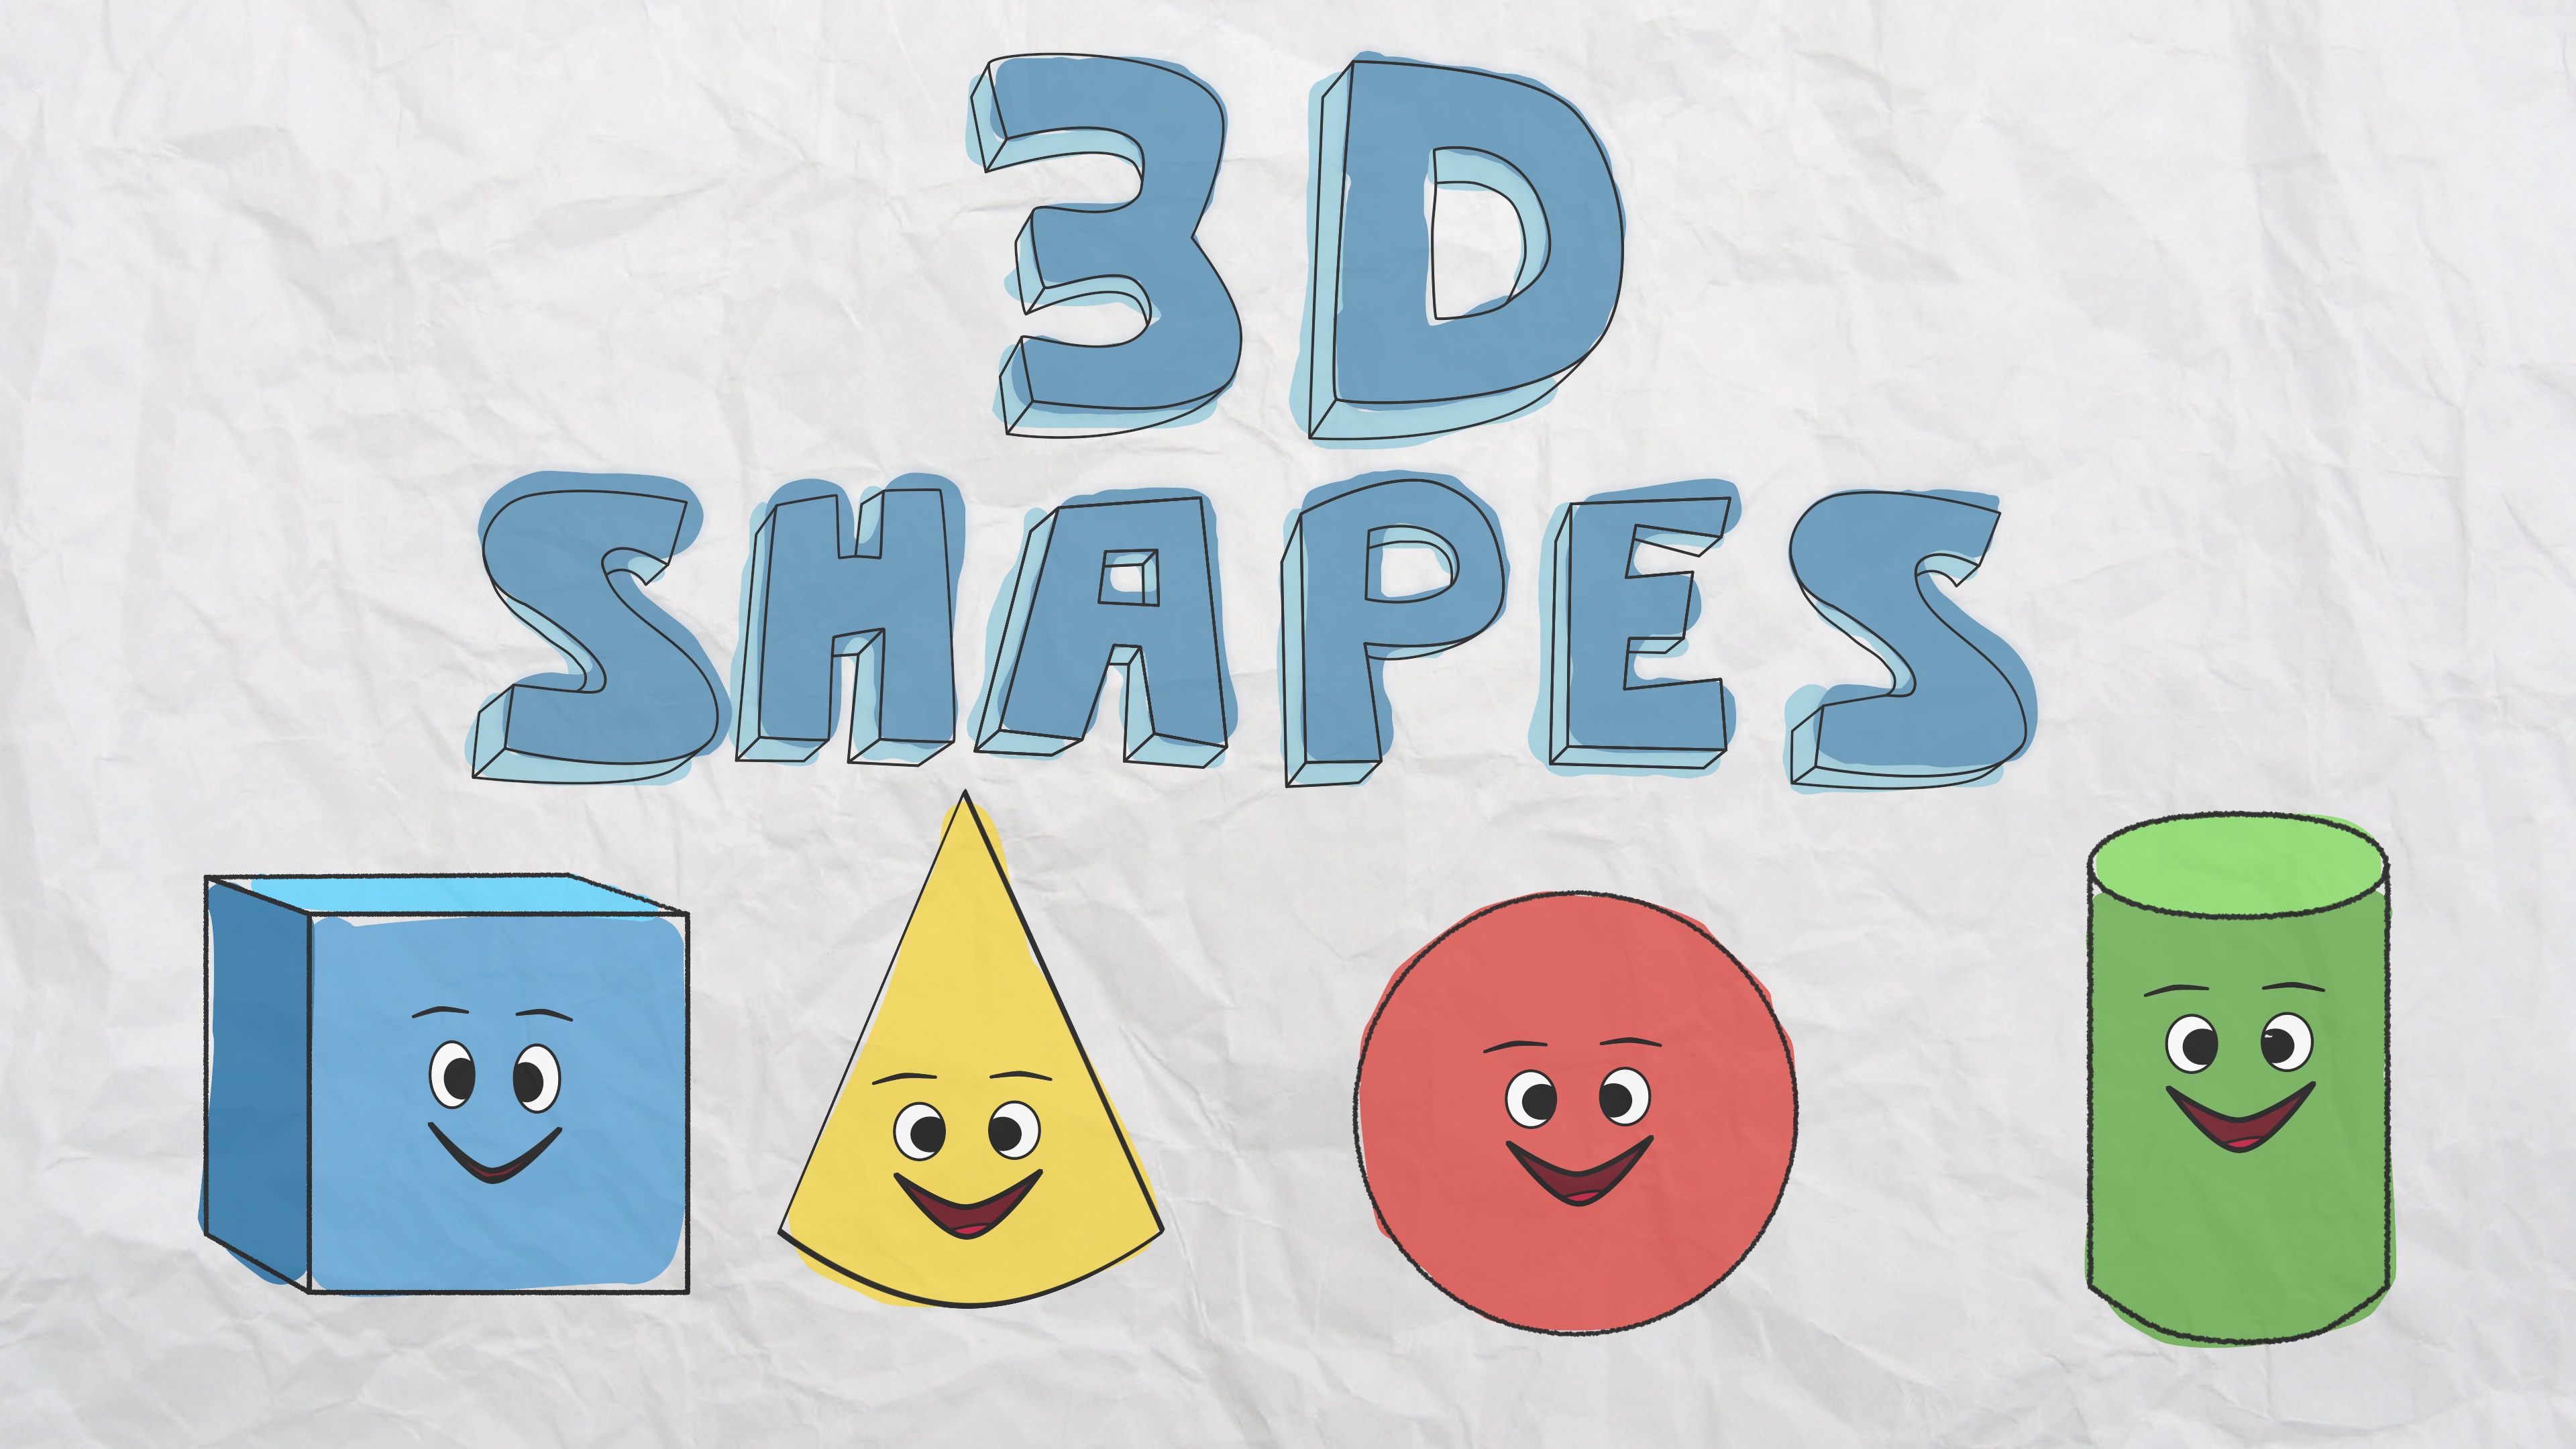 3 d shapes song